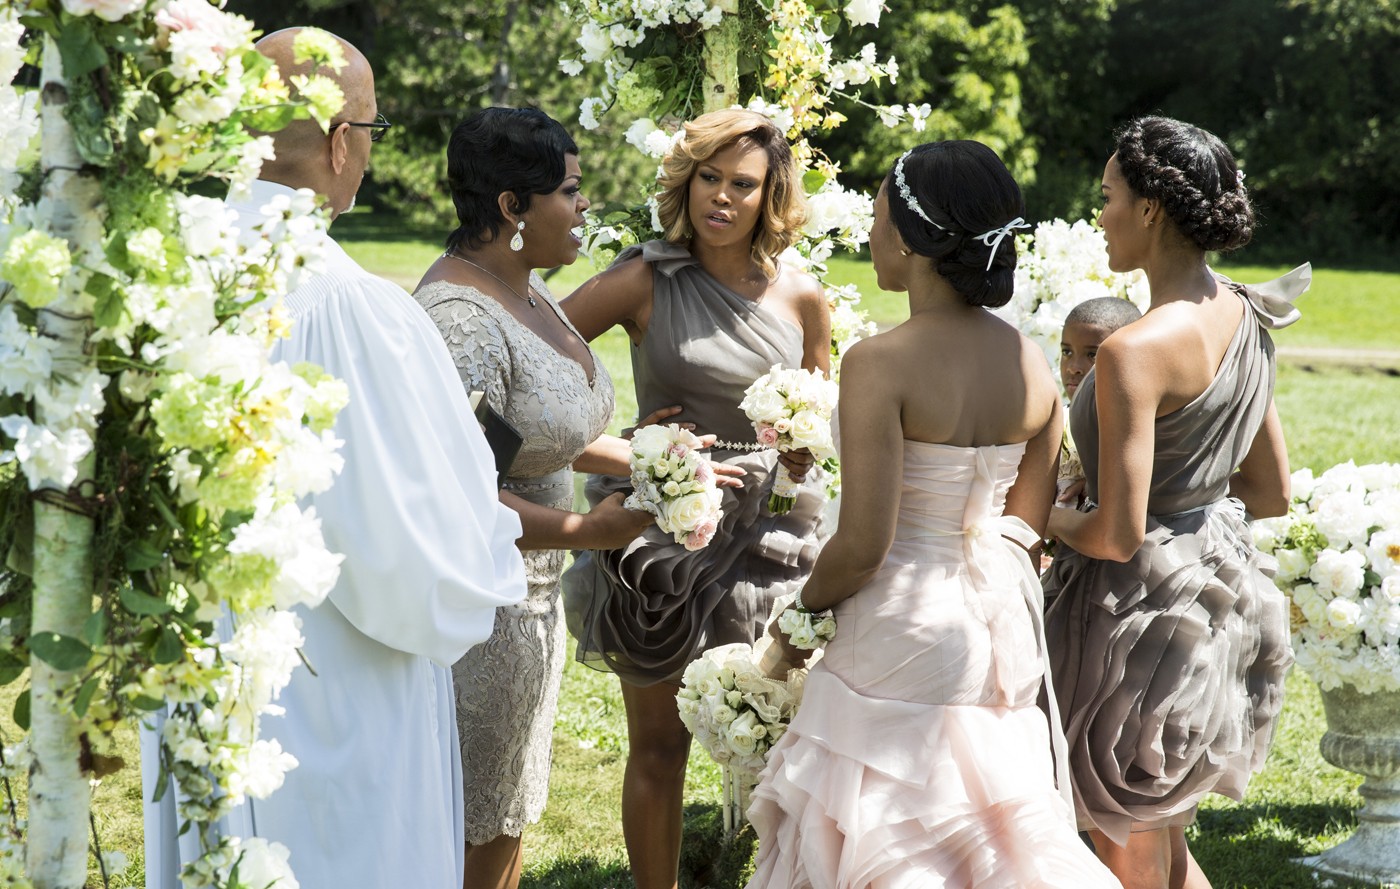 Jill Scott, Eve Jeffers Cooper, Brooklyn Sudano and Regina Hall in Lifetime's With This Ring (2015). Photo credit by Bob Mahoney.